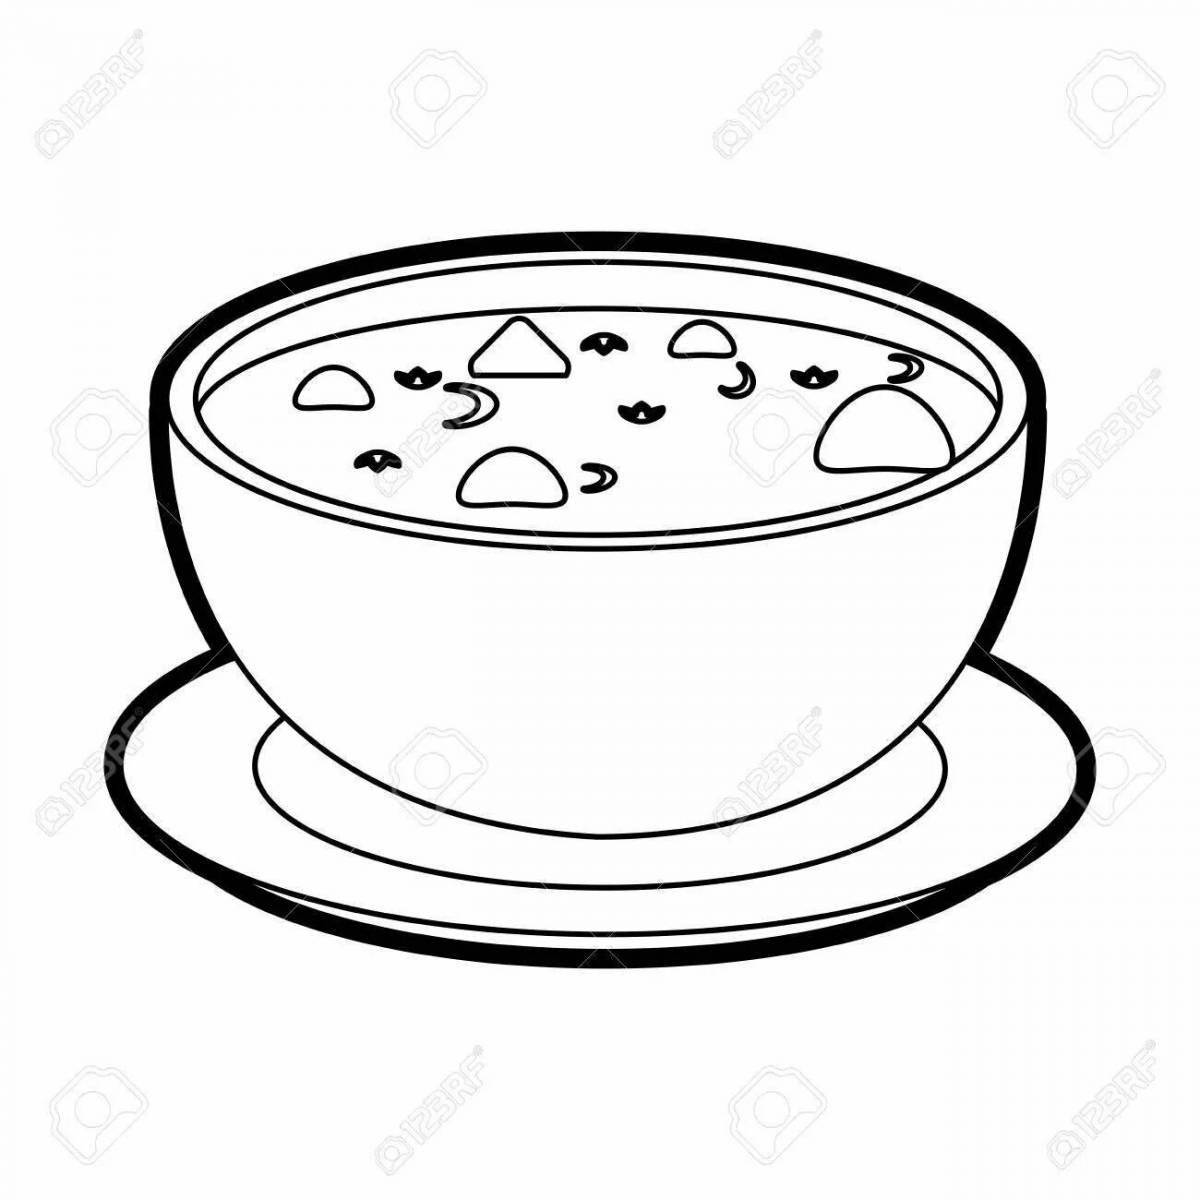 Funny soup plate coloring page